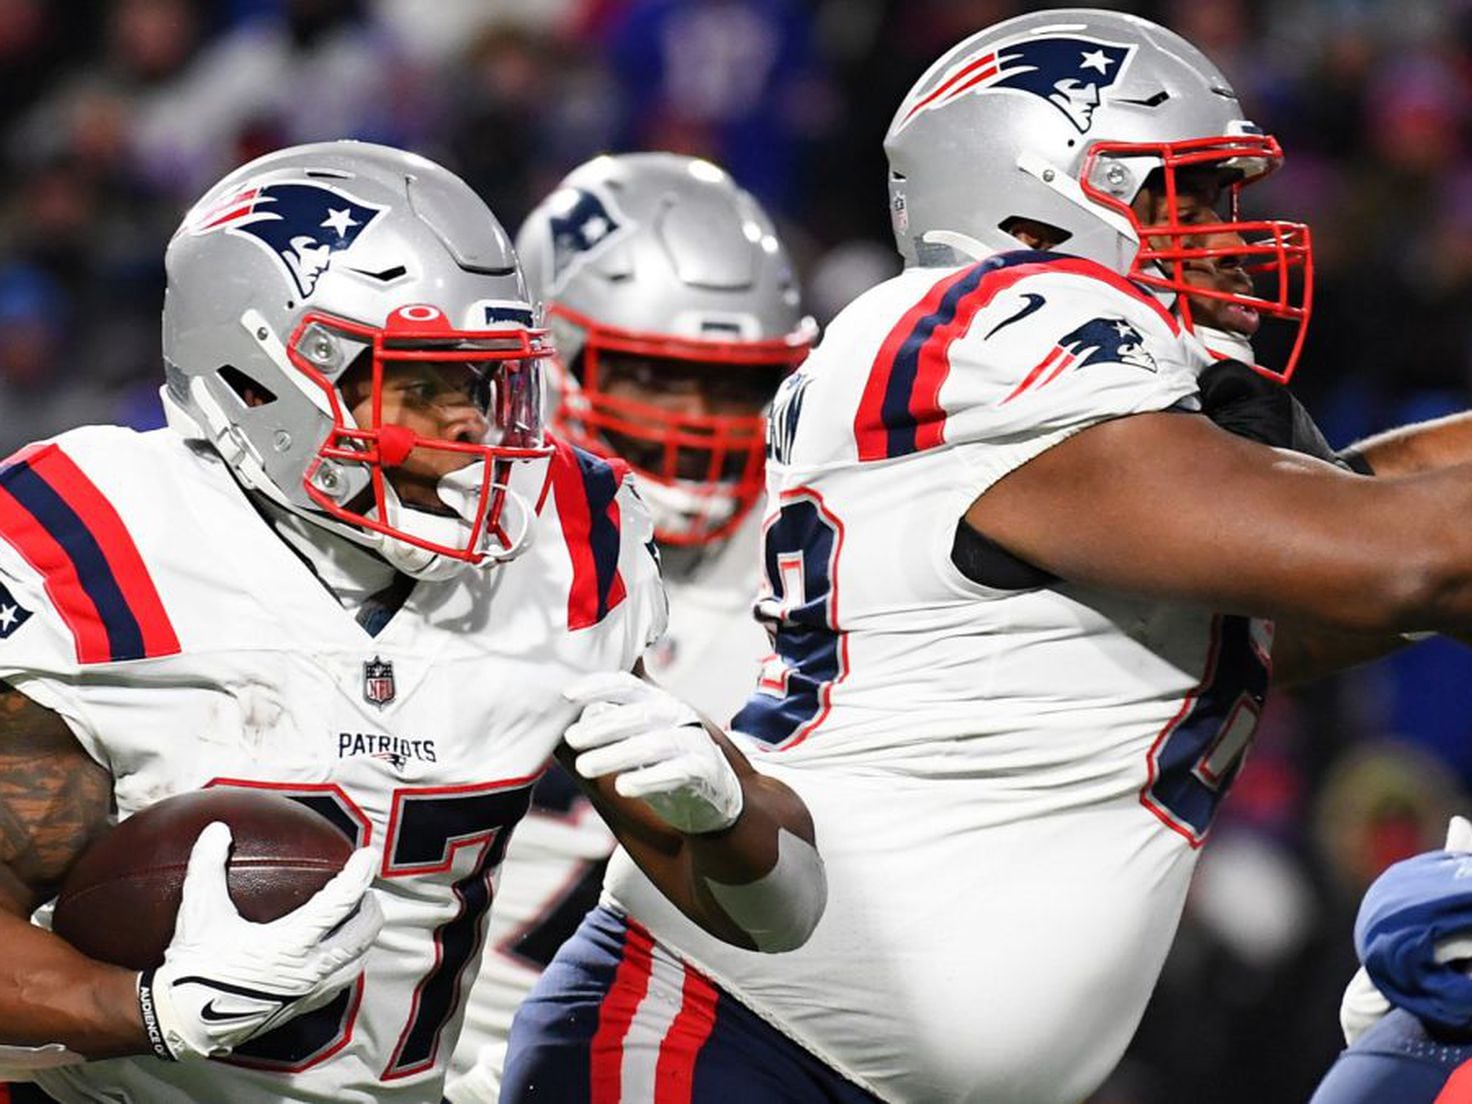 Bills-Patriots Kick Off Week Filled With Playoff-type Games